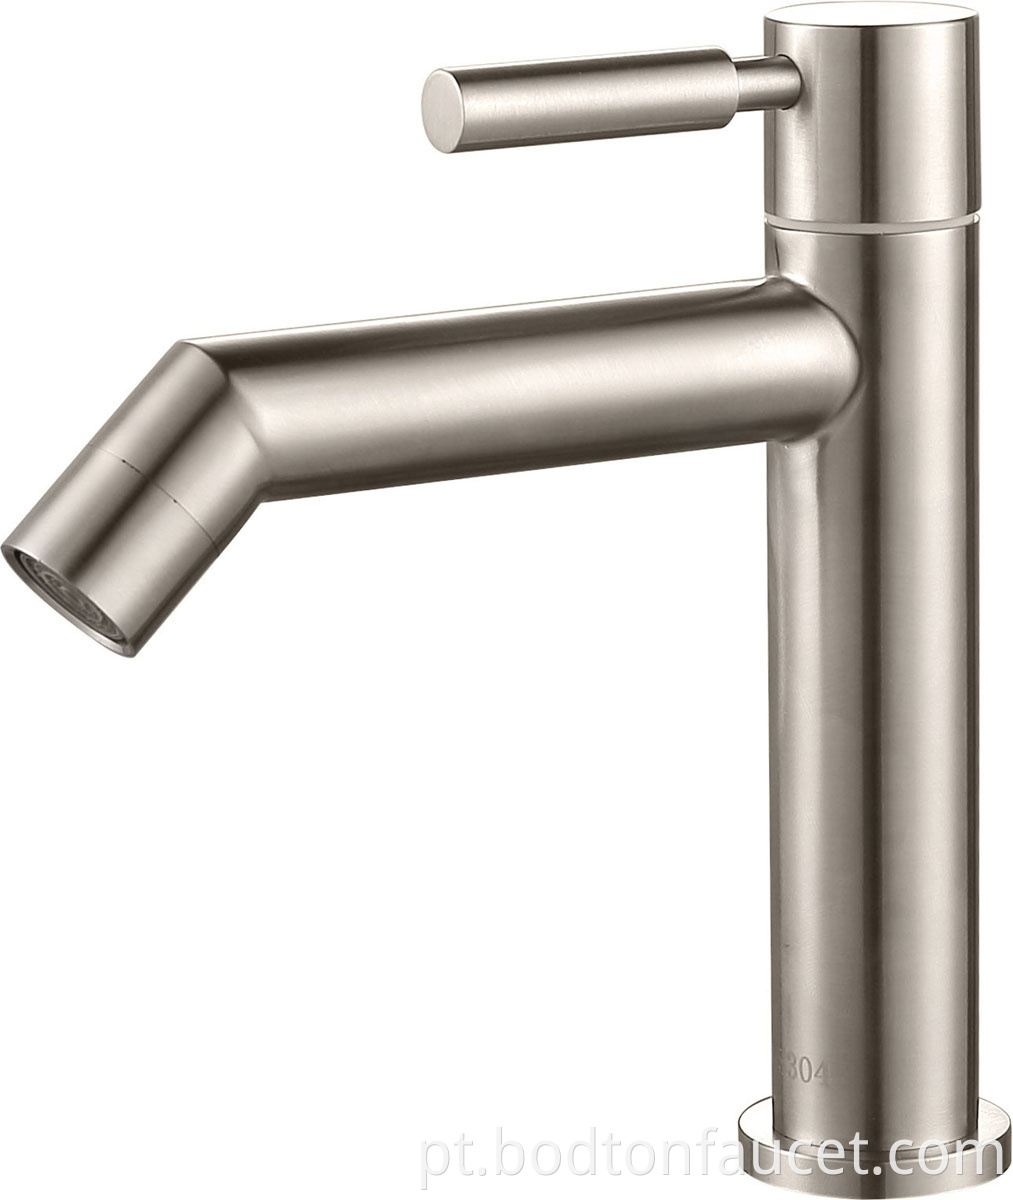 Single handle stainless steel kitchen faucet